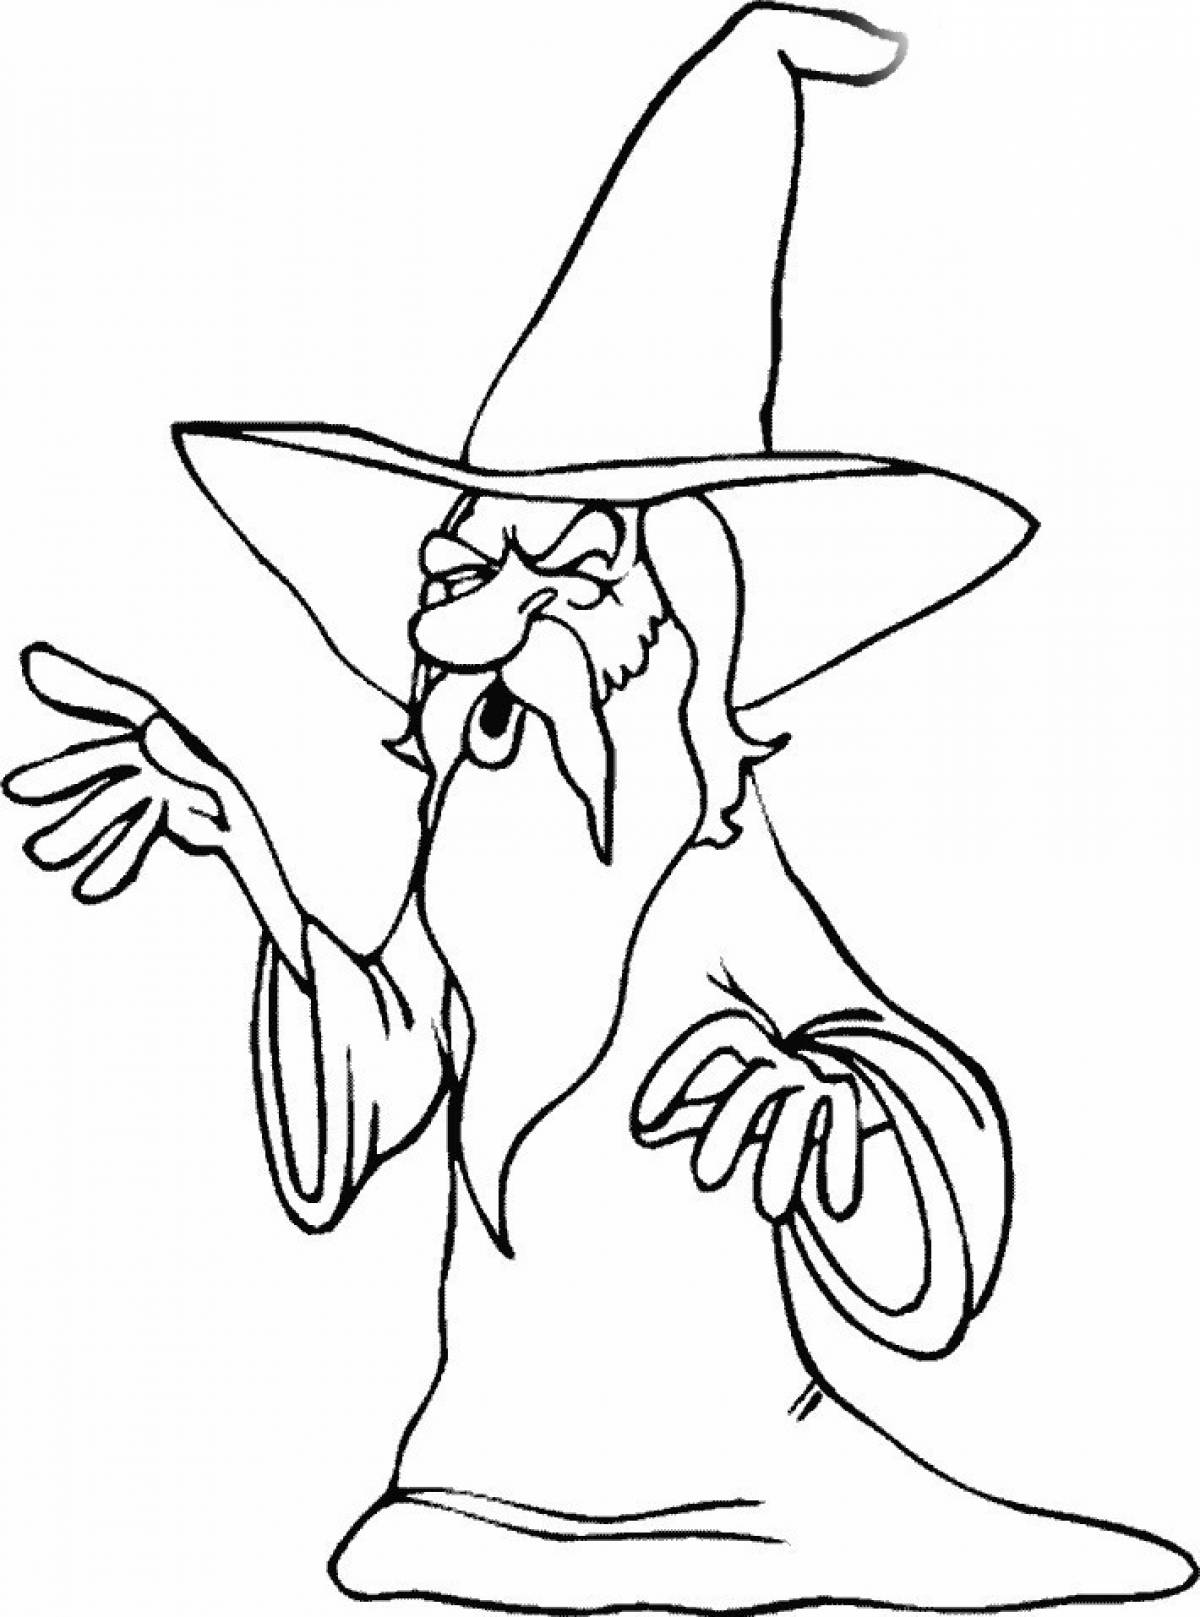 Wizard in a hat